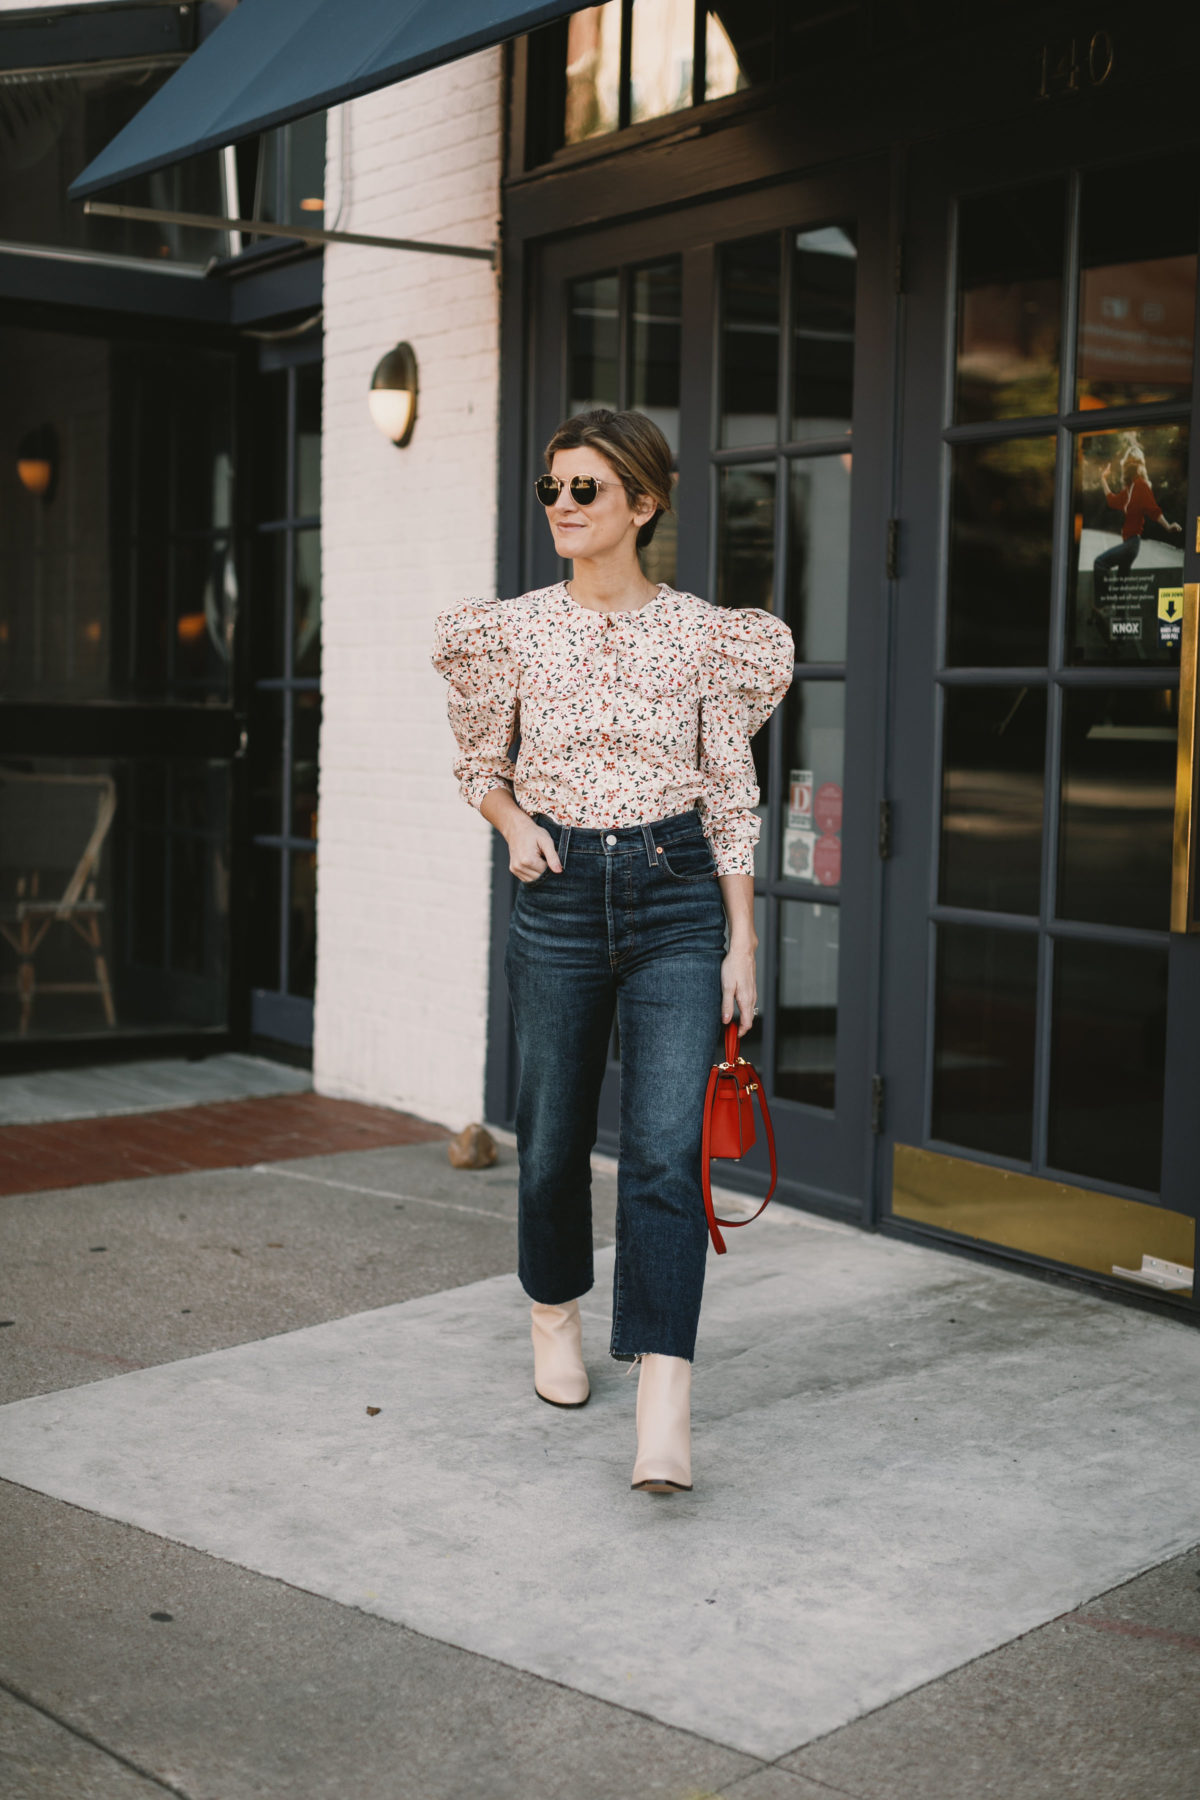 brighton butler weraing high-waisted jeans with floral top and booties